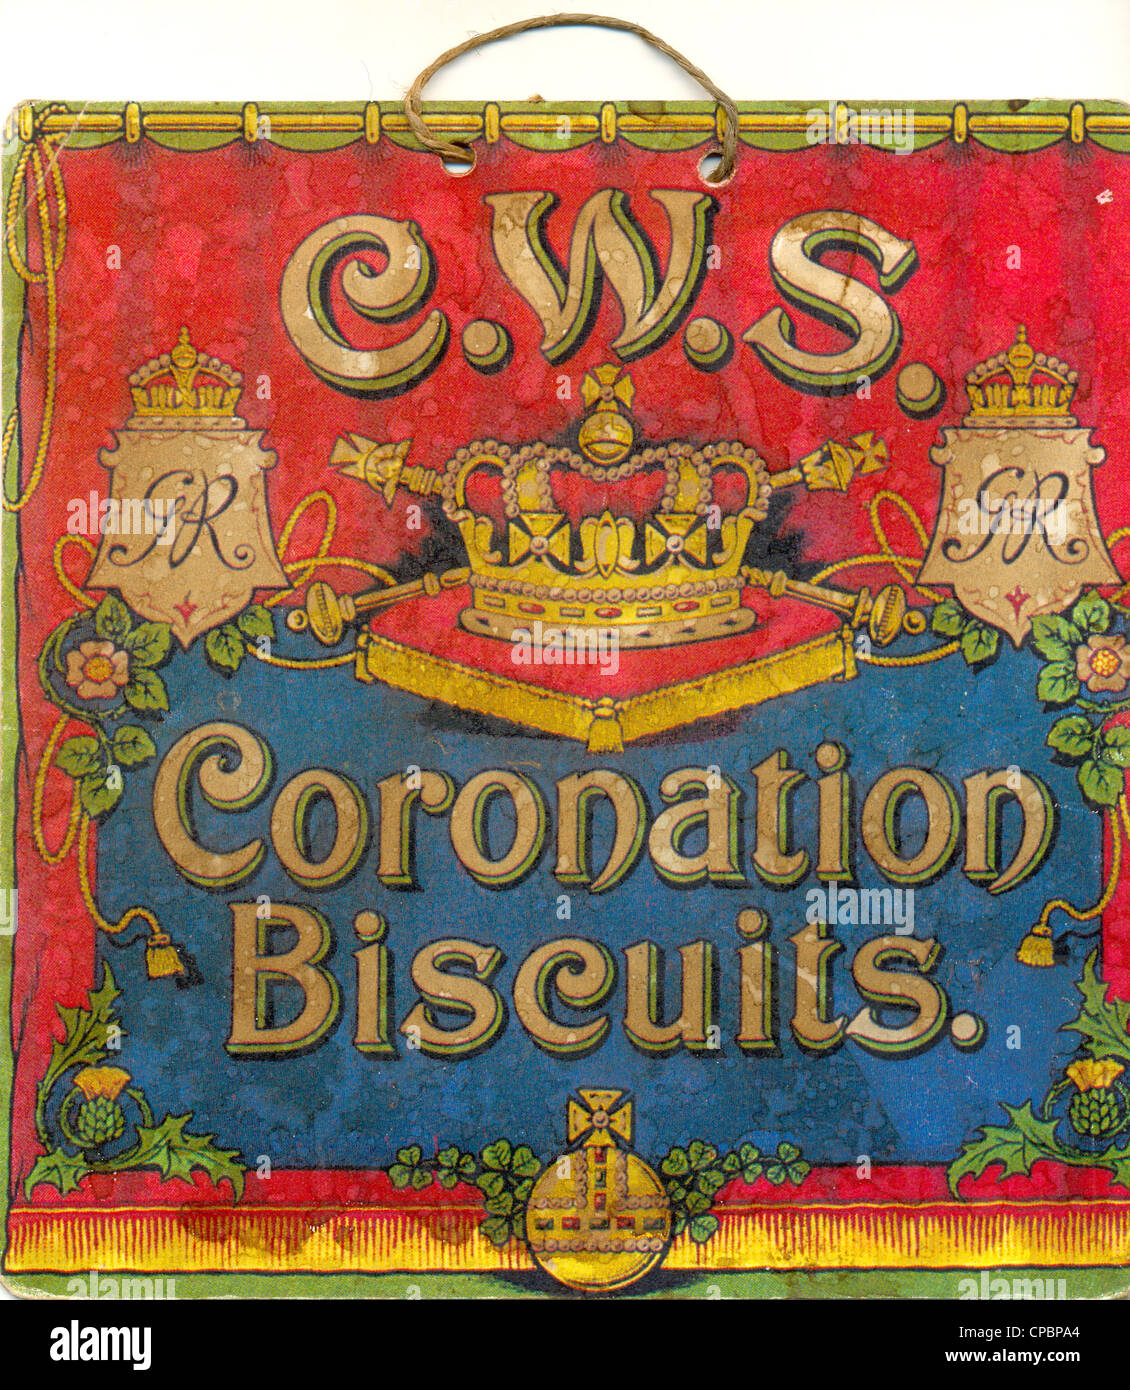 Shop card advertising CWS Coronation Biscuits Stock Photo